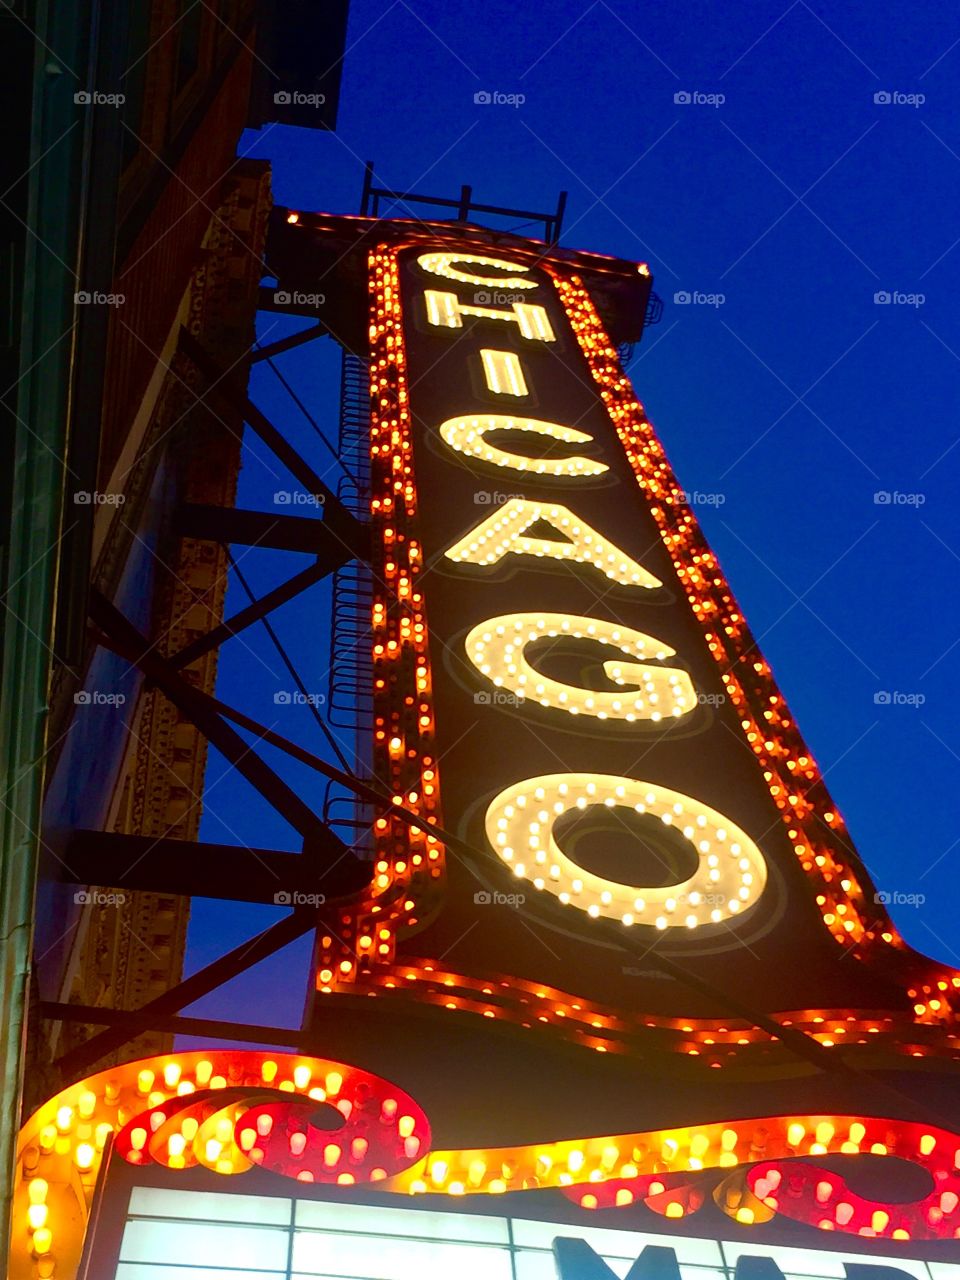 Look up!  Chicago Theater. Chicago, Illinois 